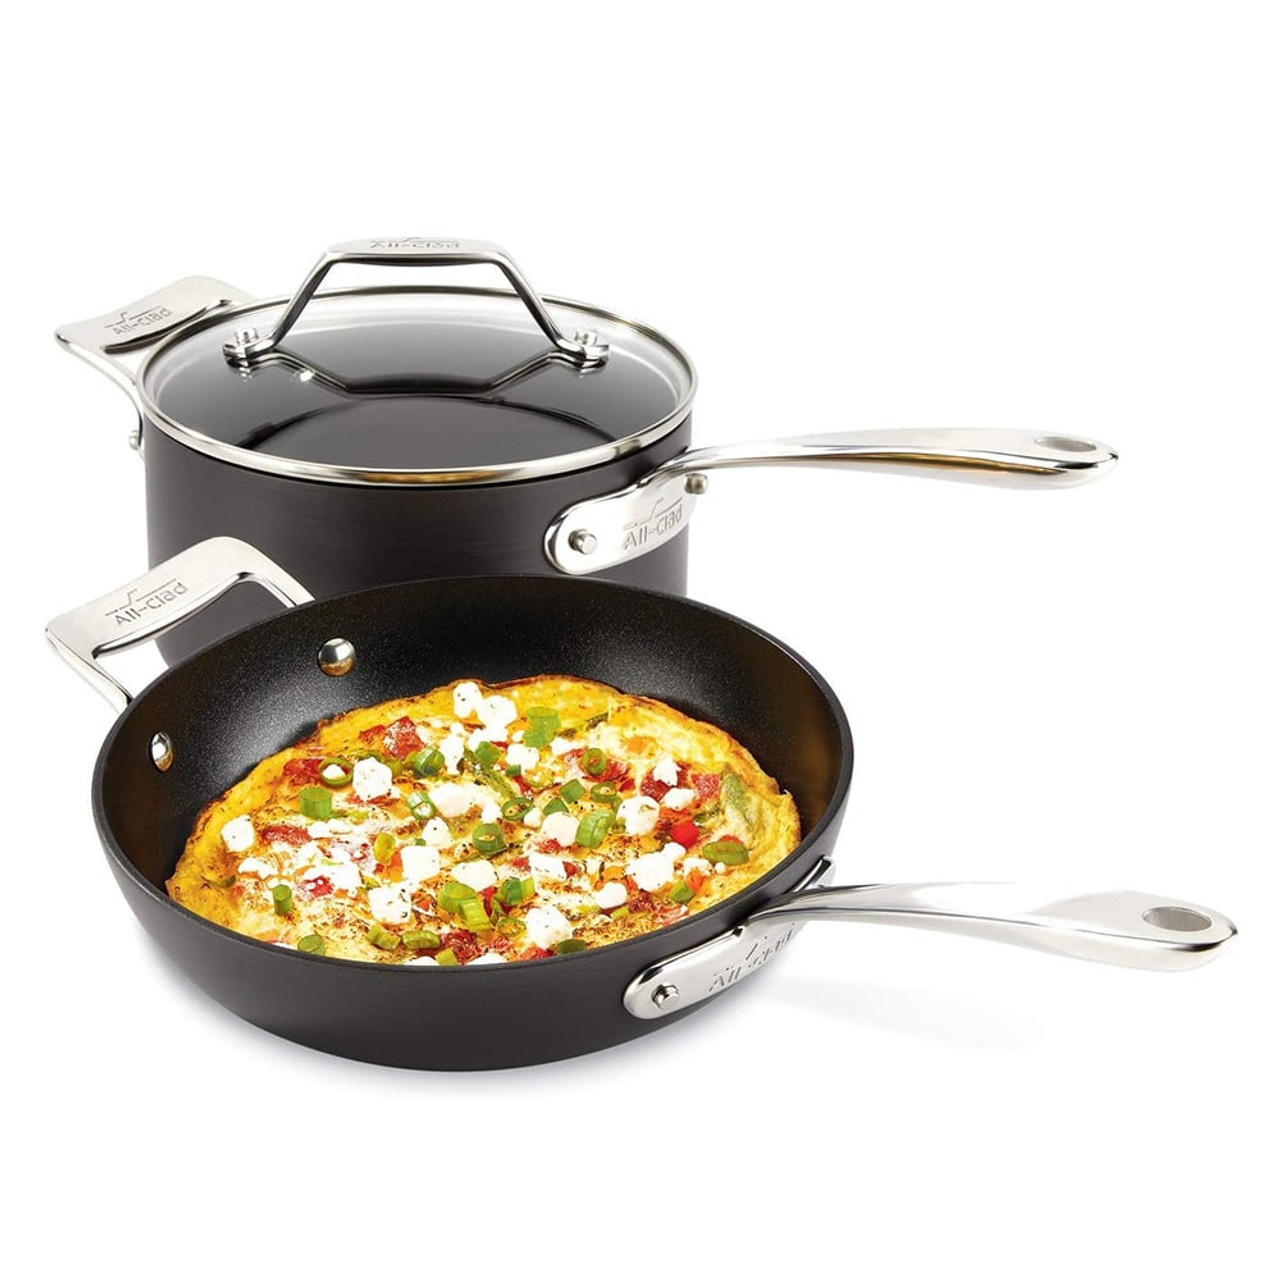  All-Clad HA1 Hard Anodized Nonstick Saute Pan with Lid and Fry  Pan Set 4 Quart, 10 Inch Induction Oven Broiler Safe 500F Pots and Pans,  Cookware Black: Home & Kitchen